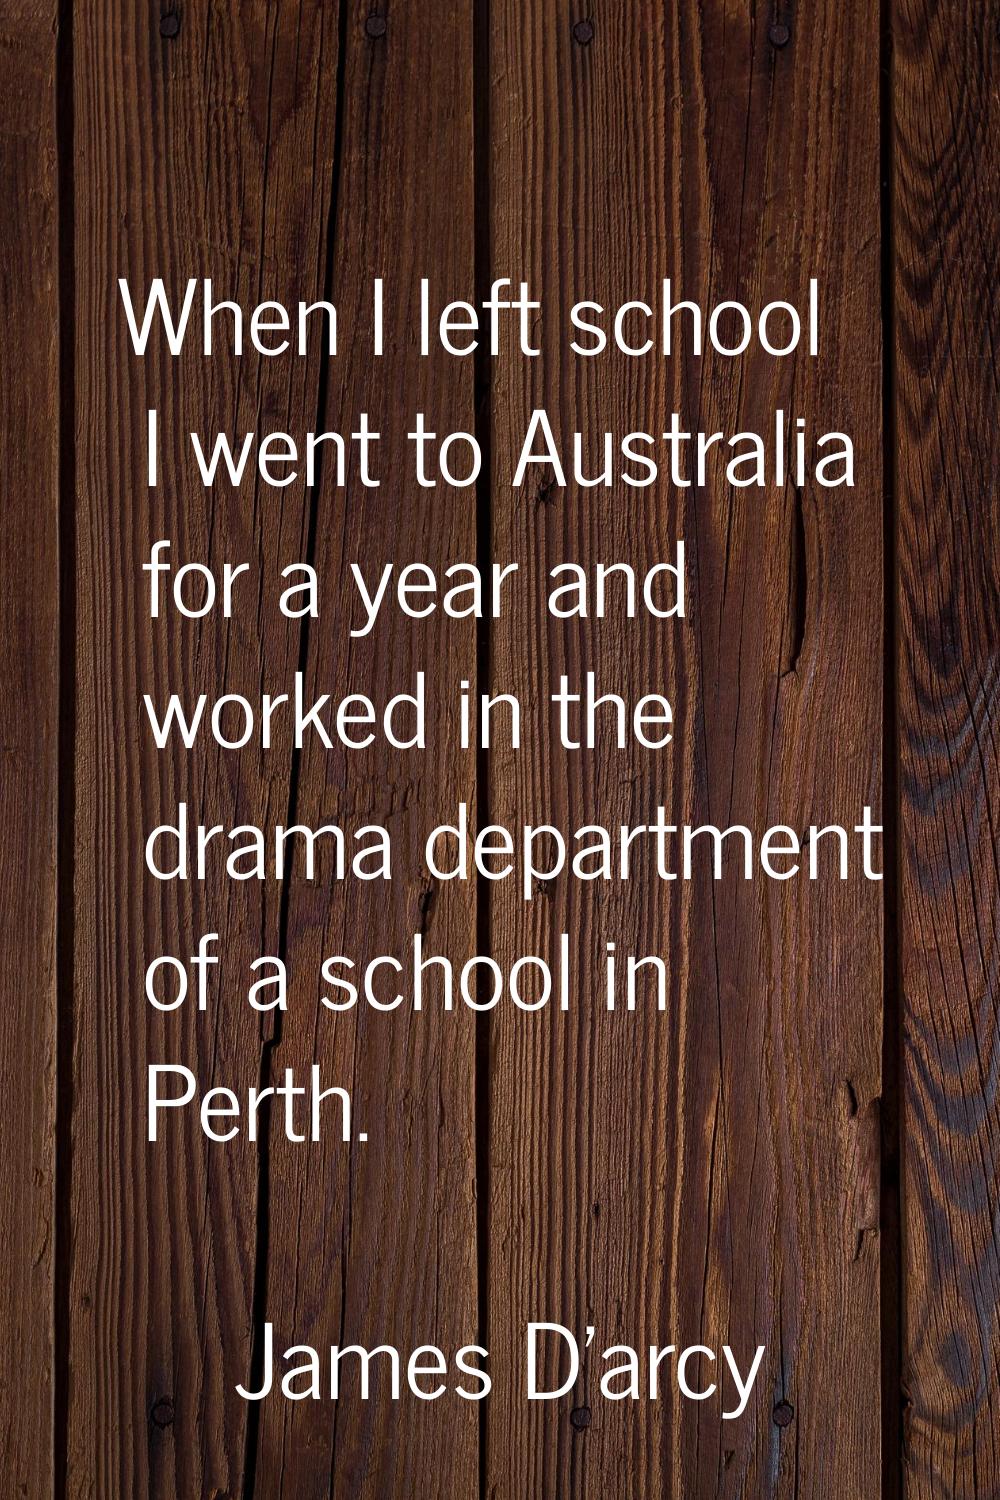 When I left school I went to Australia for a year and worked in the drama department of a school in